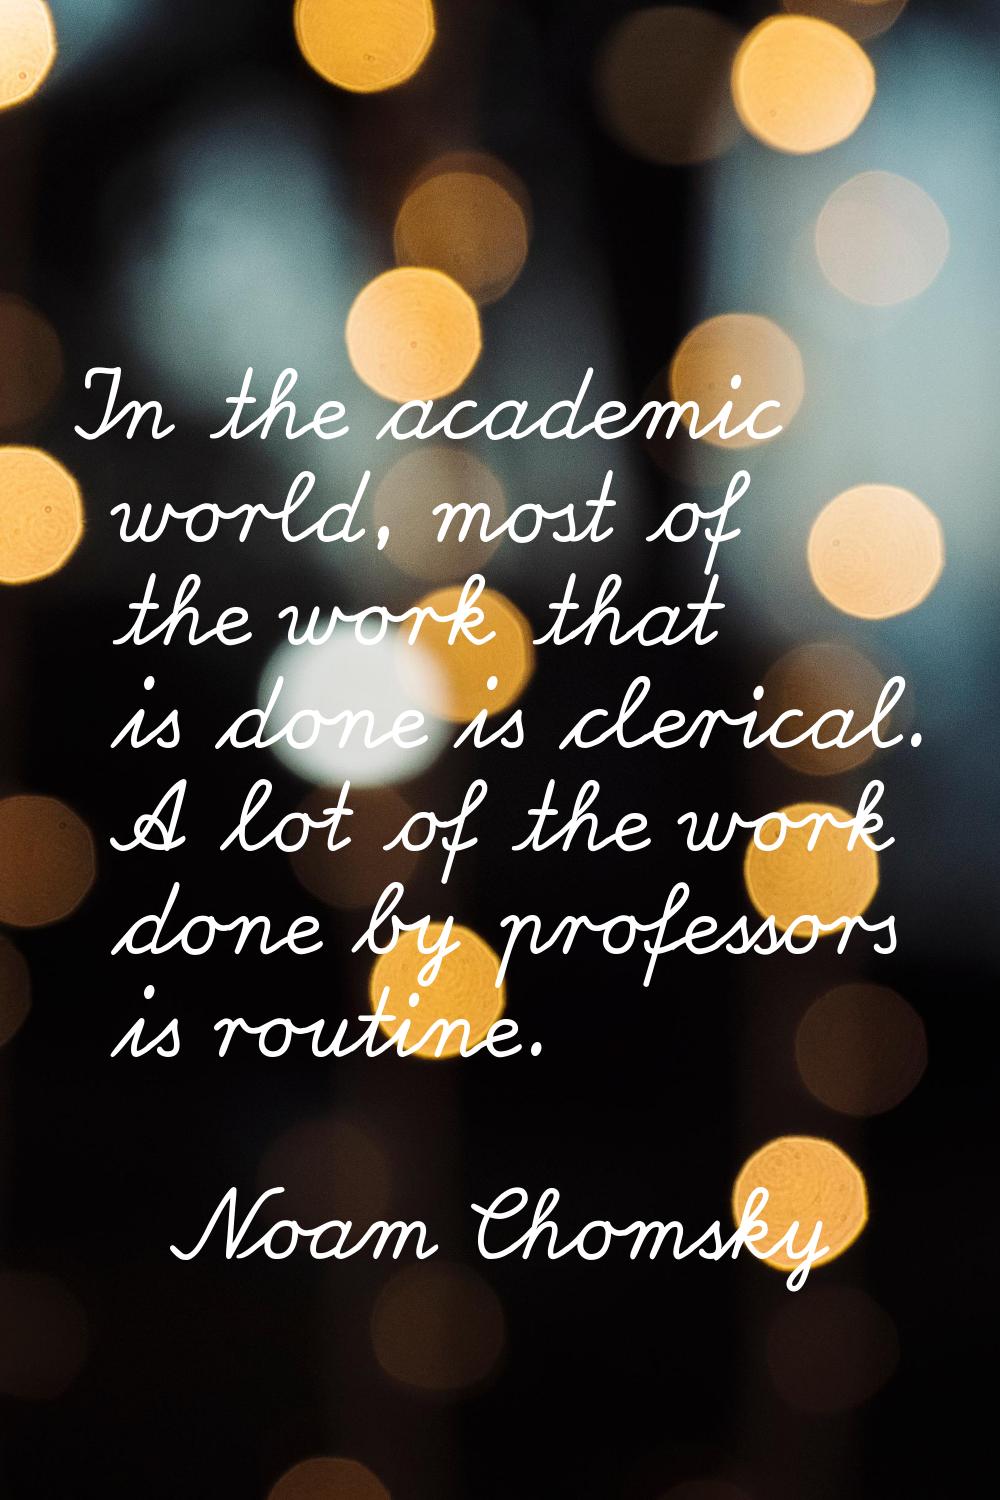 In the academic world, most of the work that is done is clerical. A lot of the work done by profess